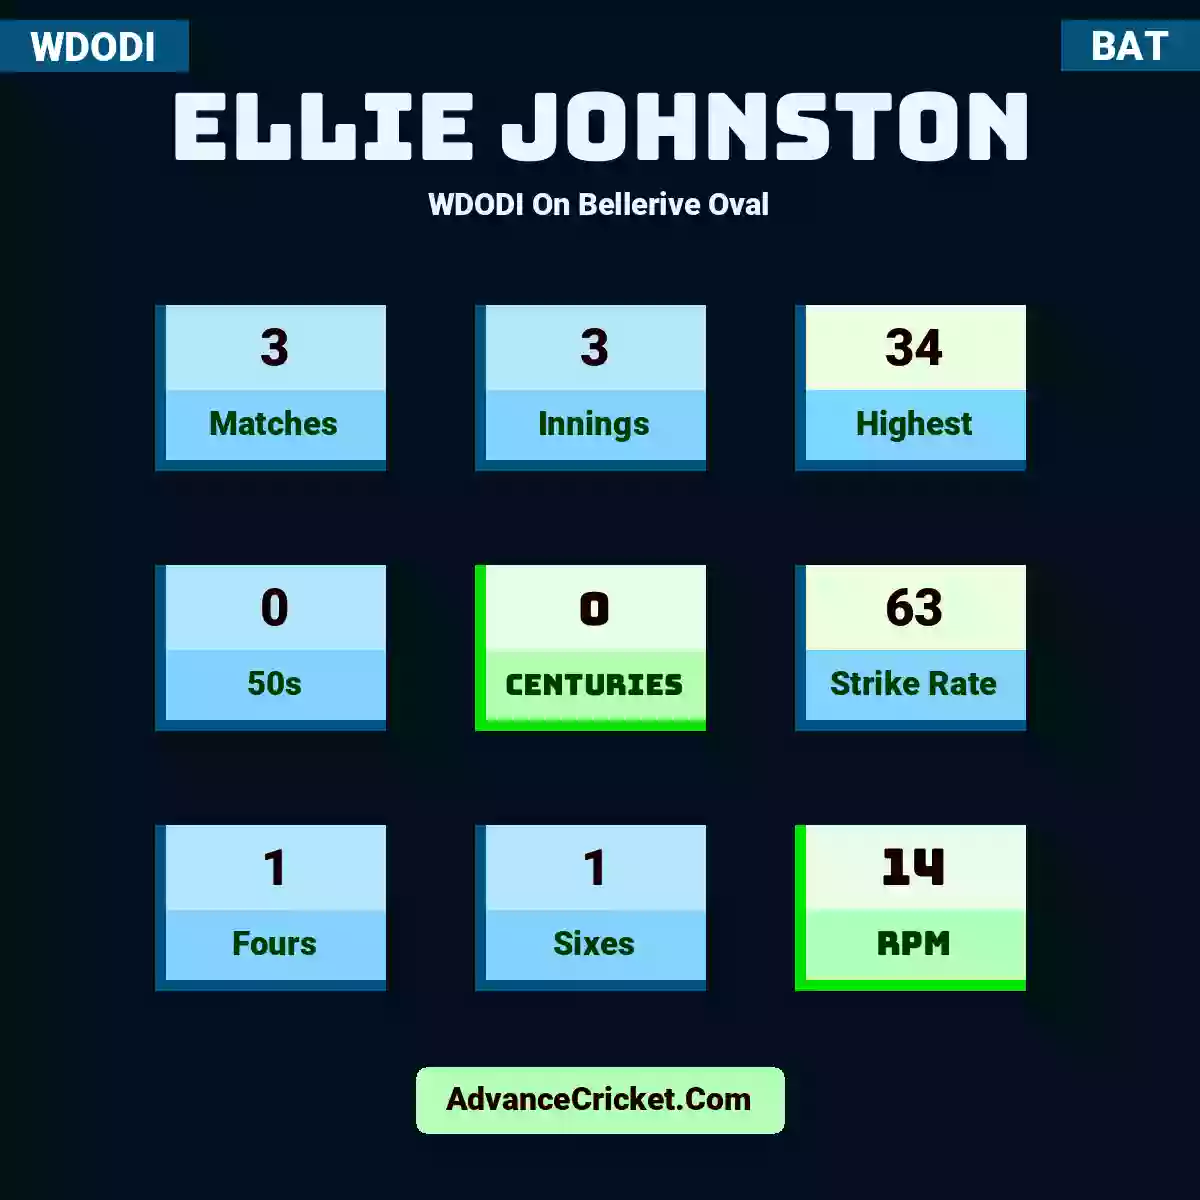 Ellie Johnston WDODI  On Bellerive Oval, Ellie Johnston played 3 matches, scored 34 runs as highest, 0 half-centuries, and 0 centuries, with a strike rate of 63. E.Johnston hit 1 fours and 1 sixes, with an RPM of 14.